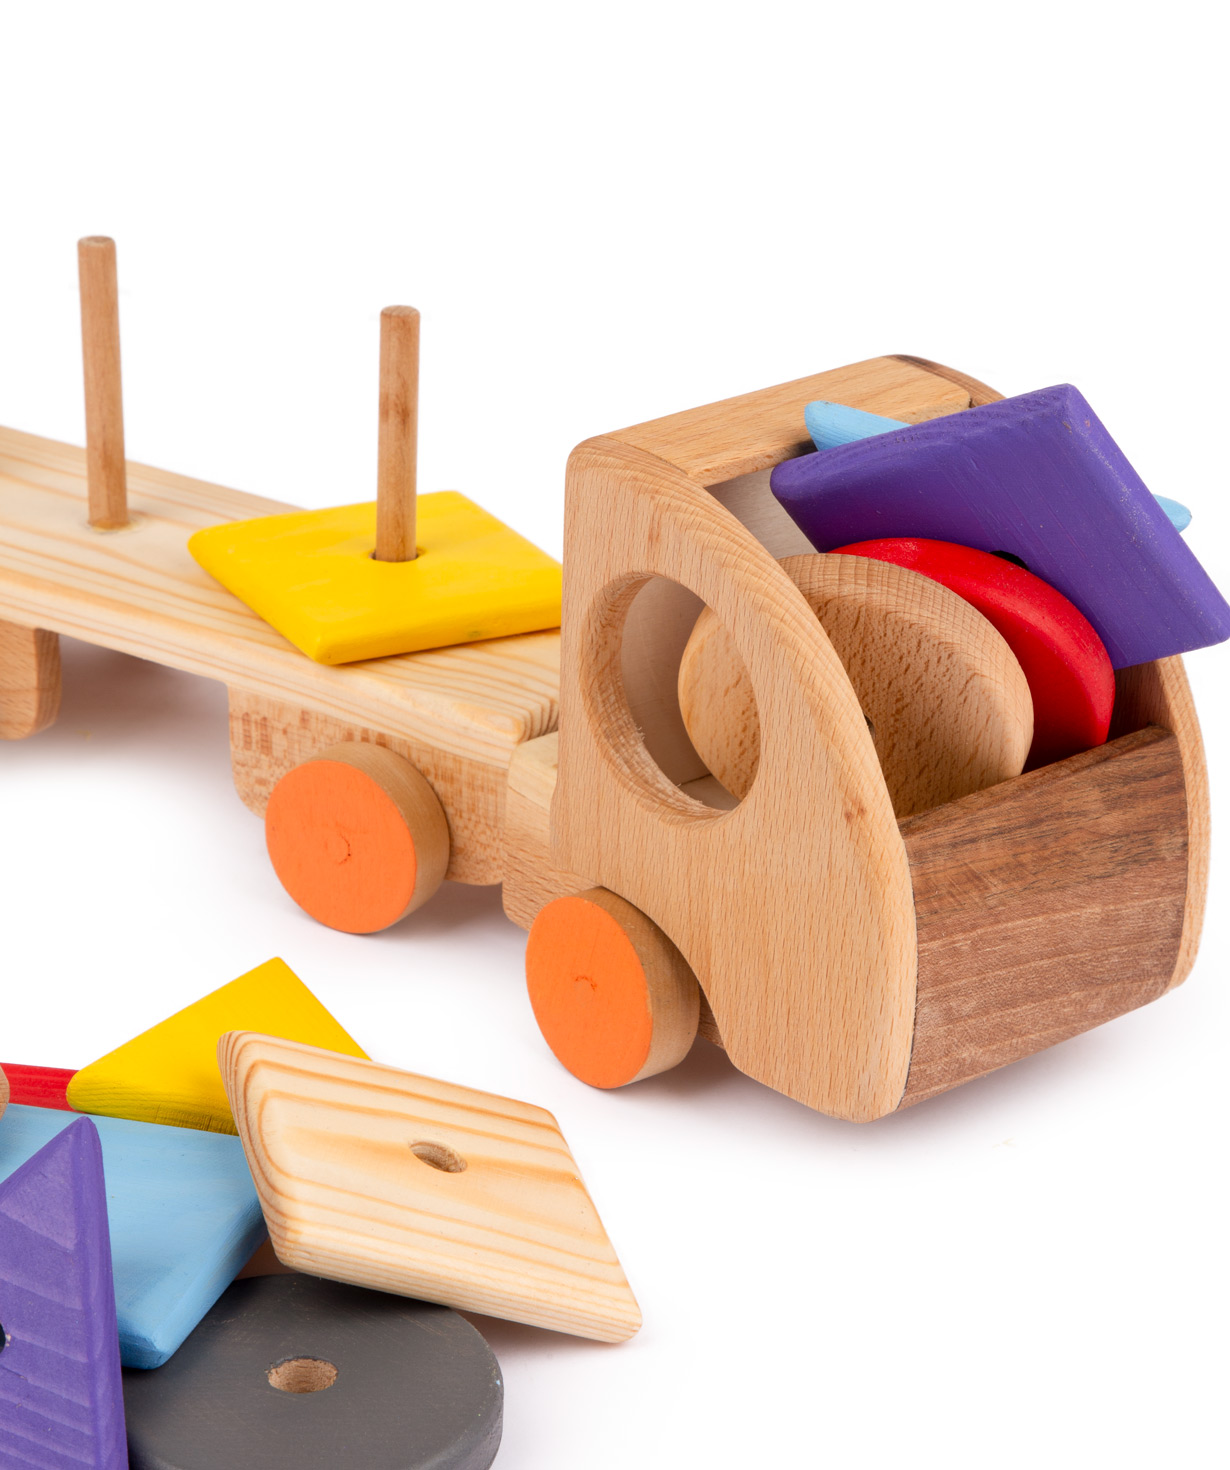 Toy `I'm wooden toys` car, wooden №7